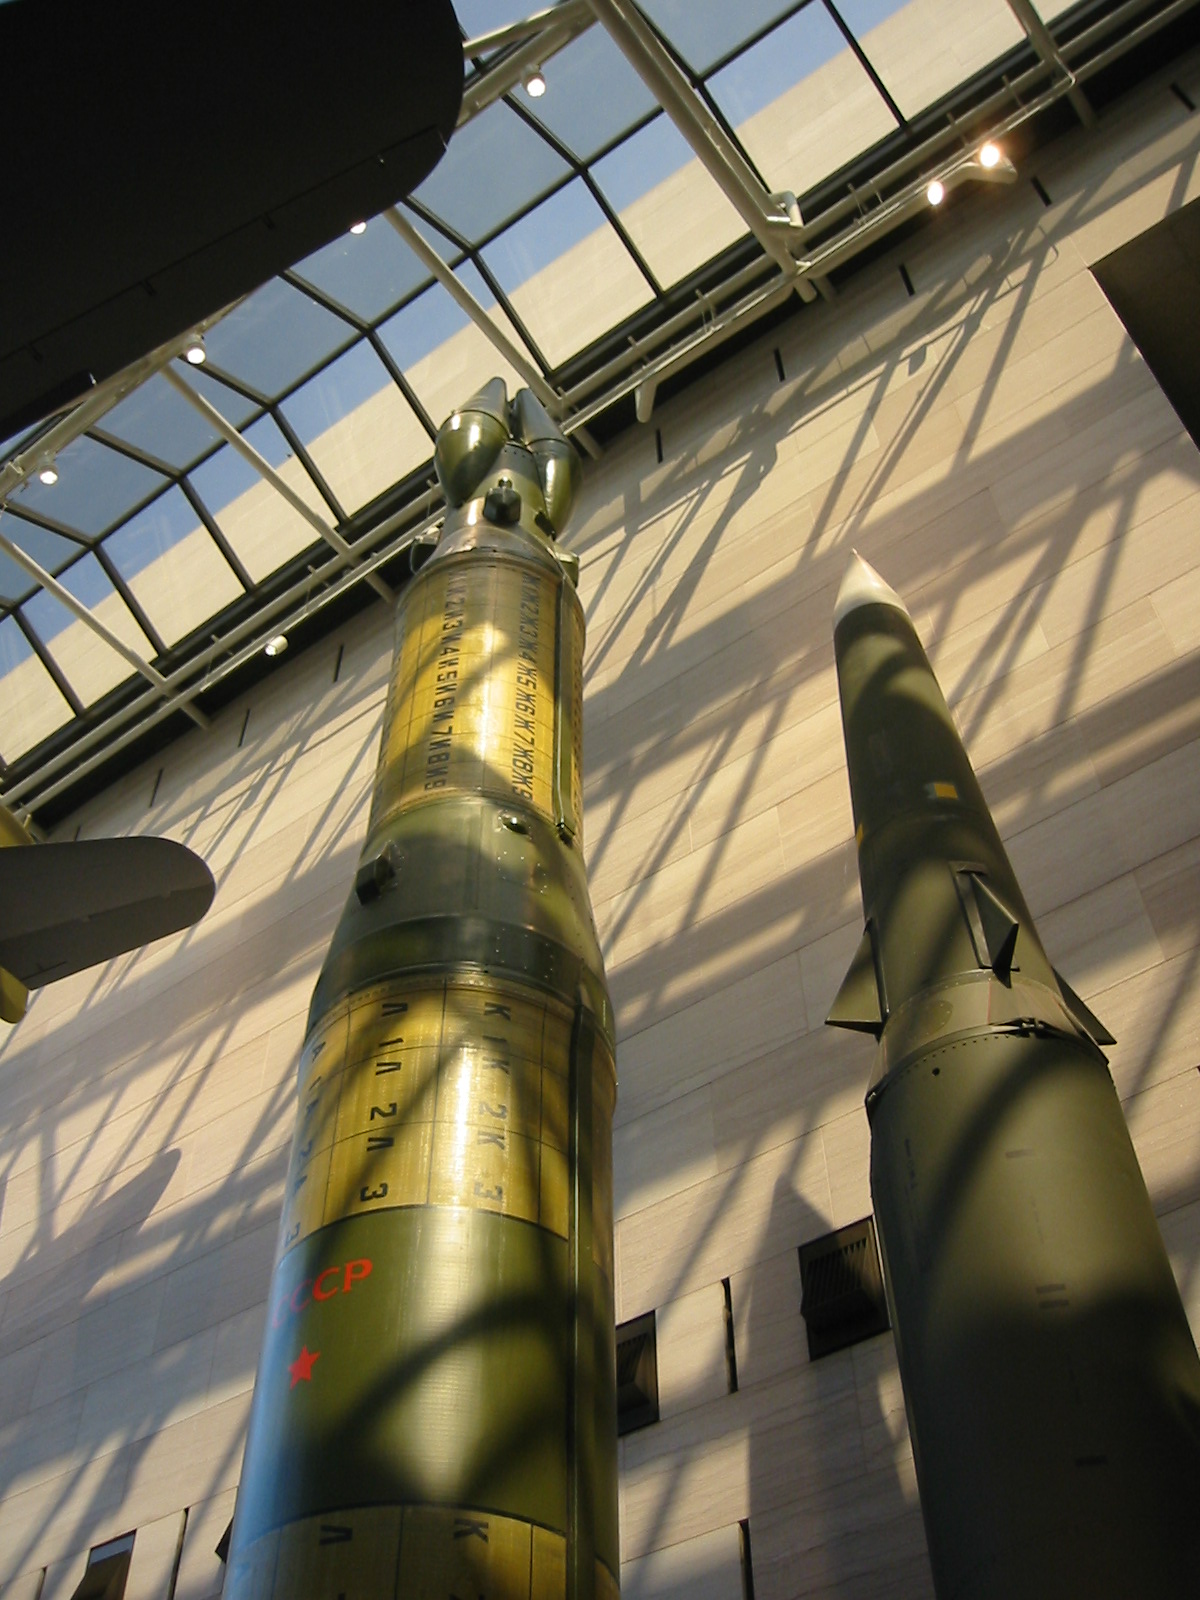 two giant missiles sitting next to each other